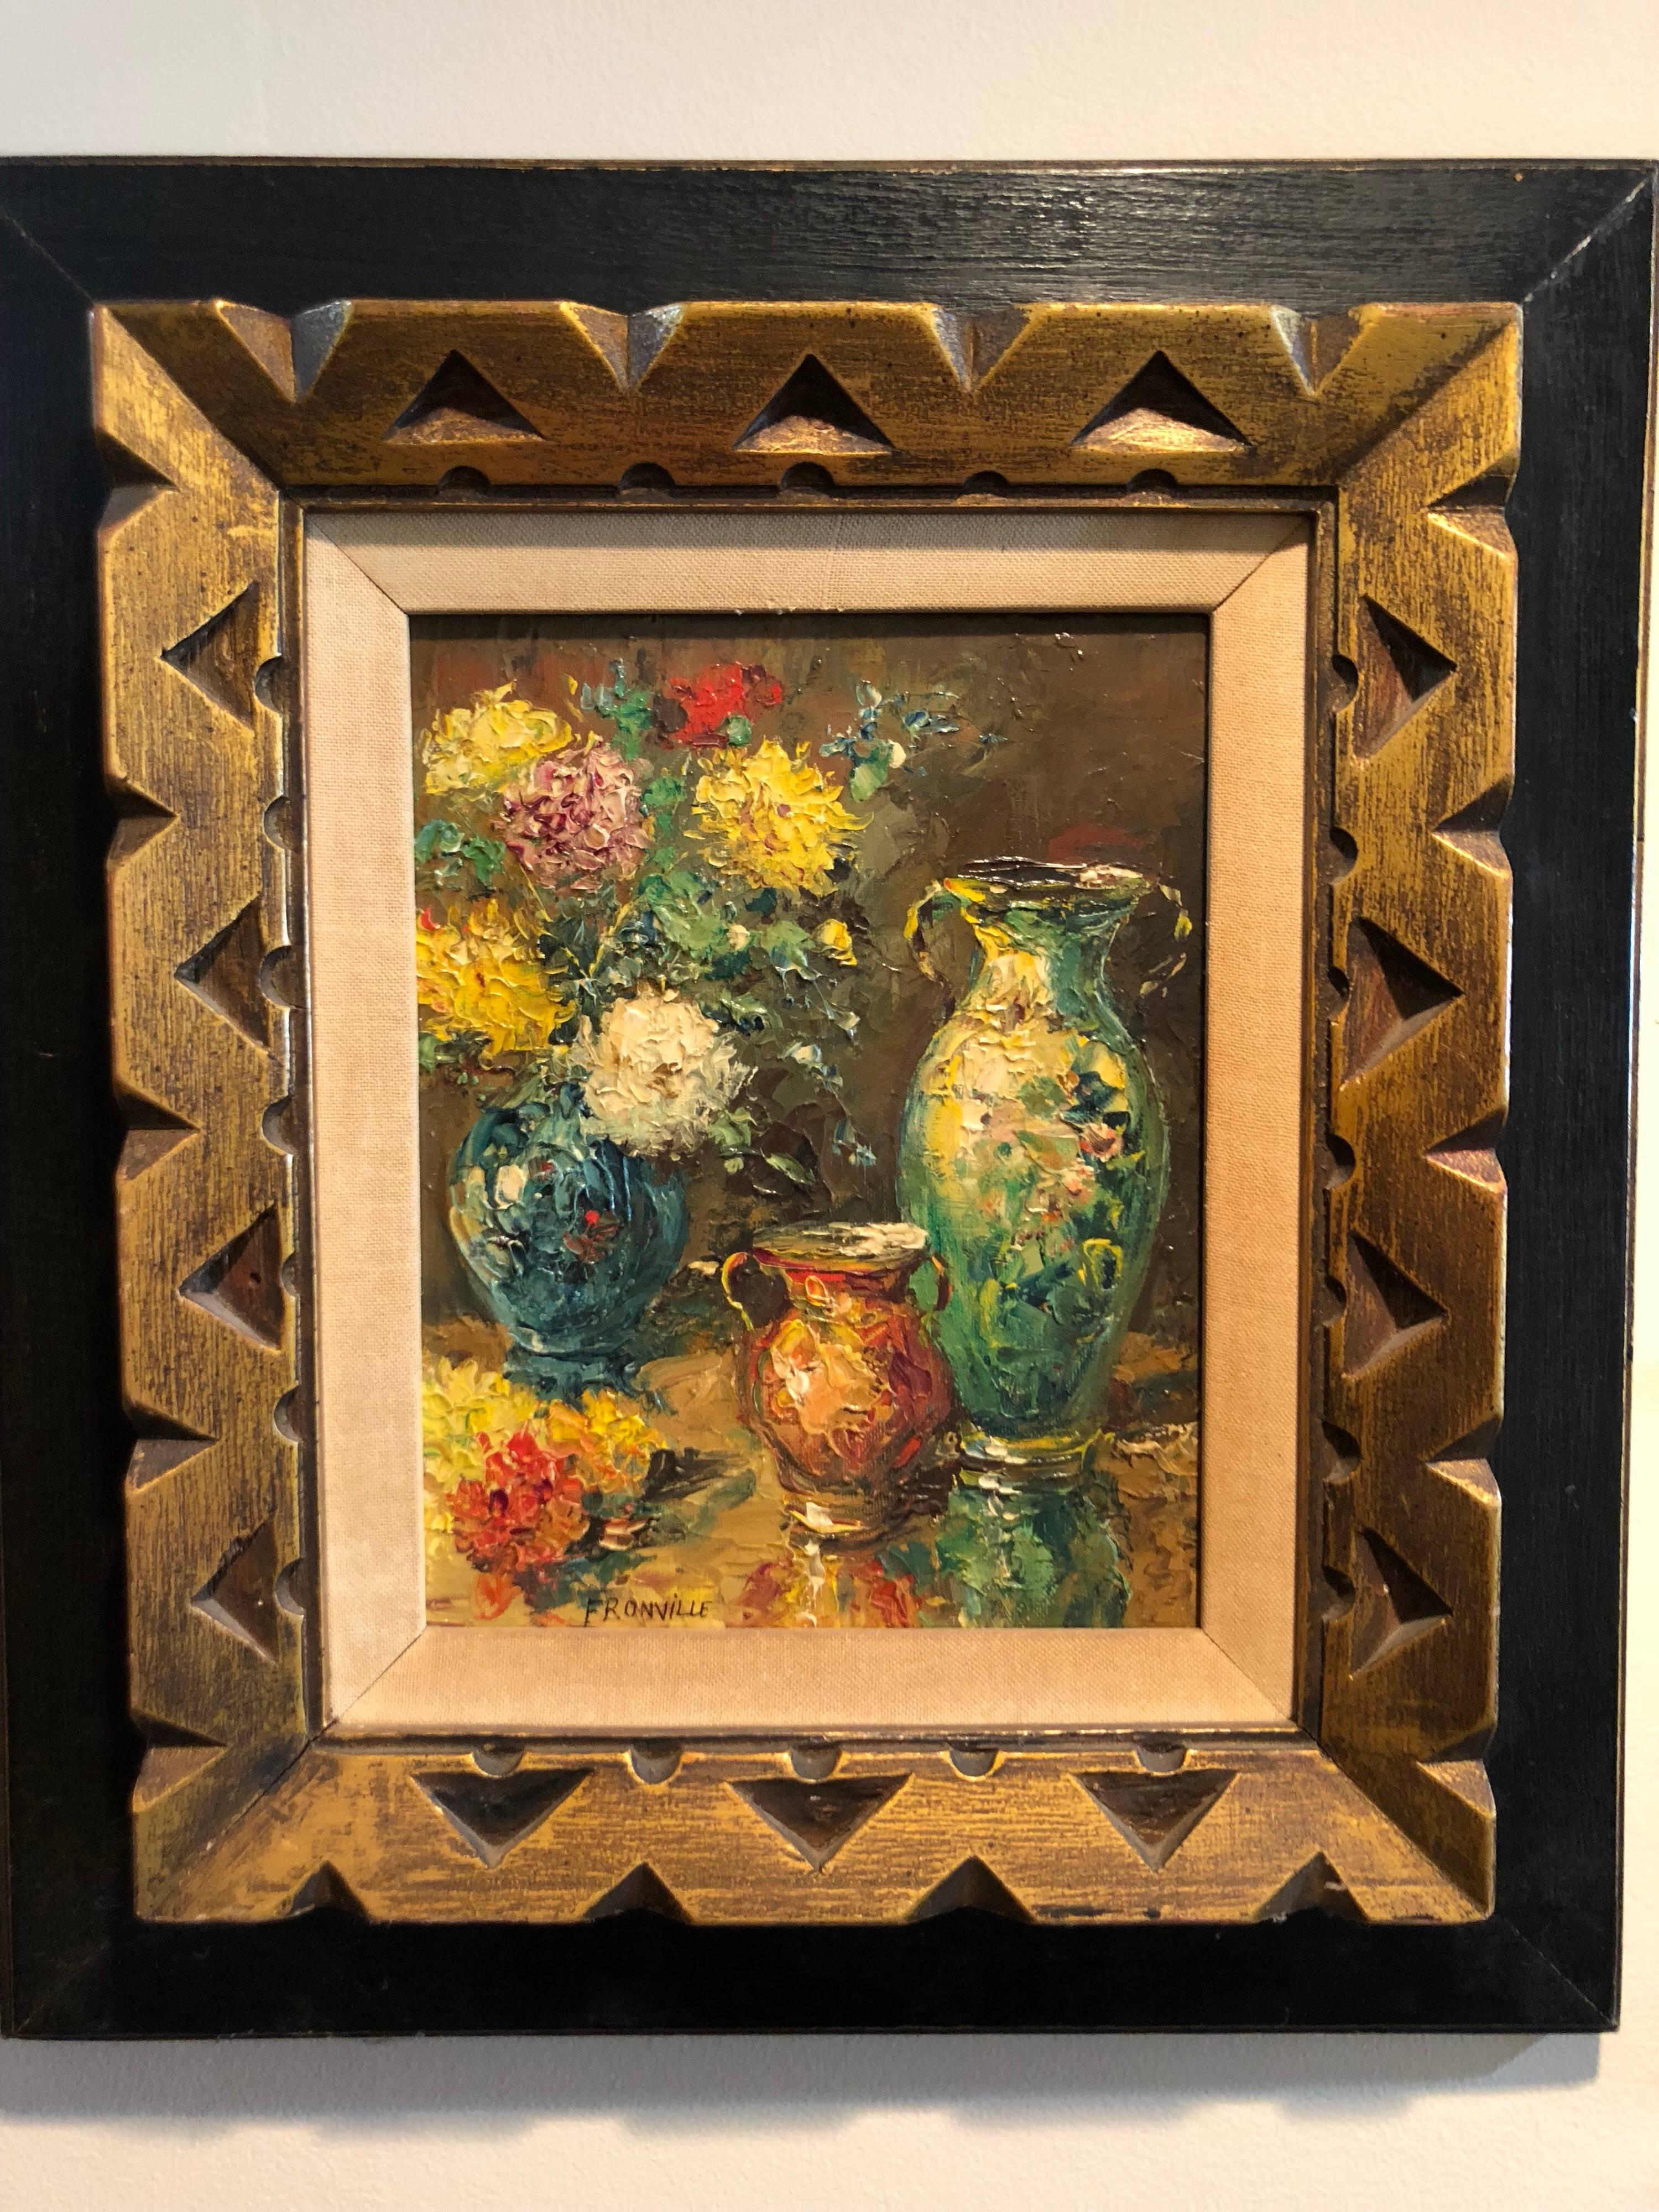 Midcentury Impasto still life by Constant Fronville. A listed and well-known Canadian artist. It is signed lower right hand corner. Nice heavy impasto style oil on canvas. Linen matted and pretty double banded solid wooden hand-carved vintage frame.